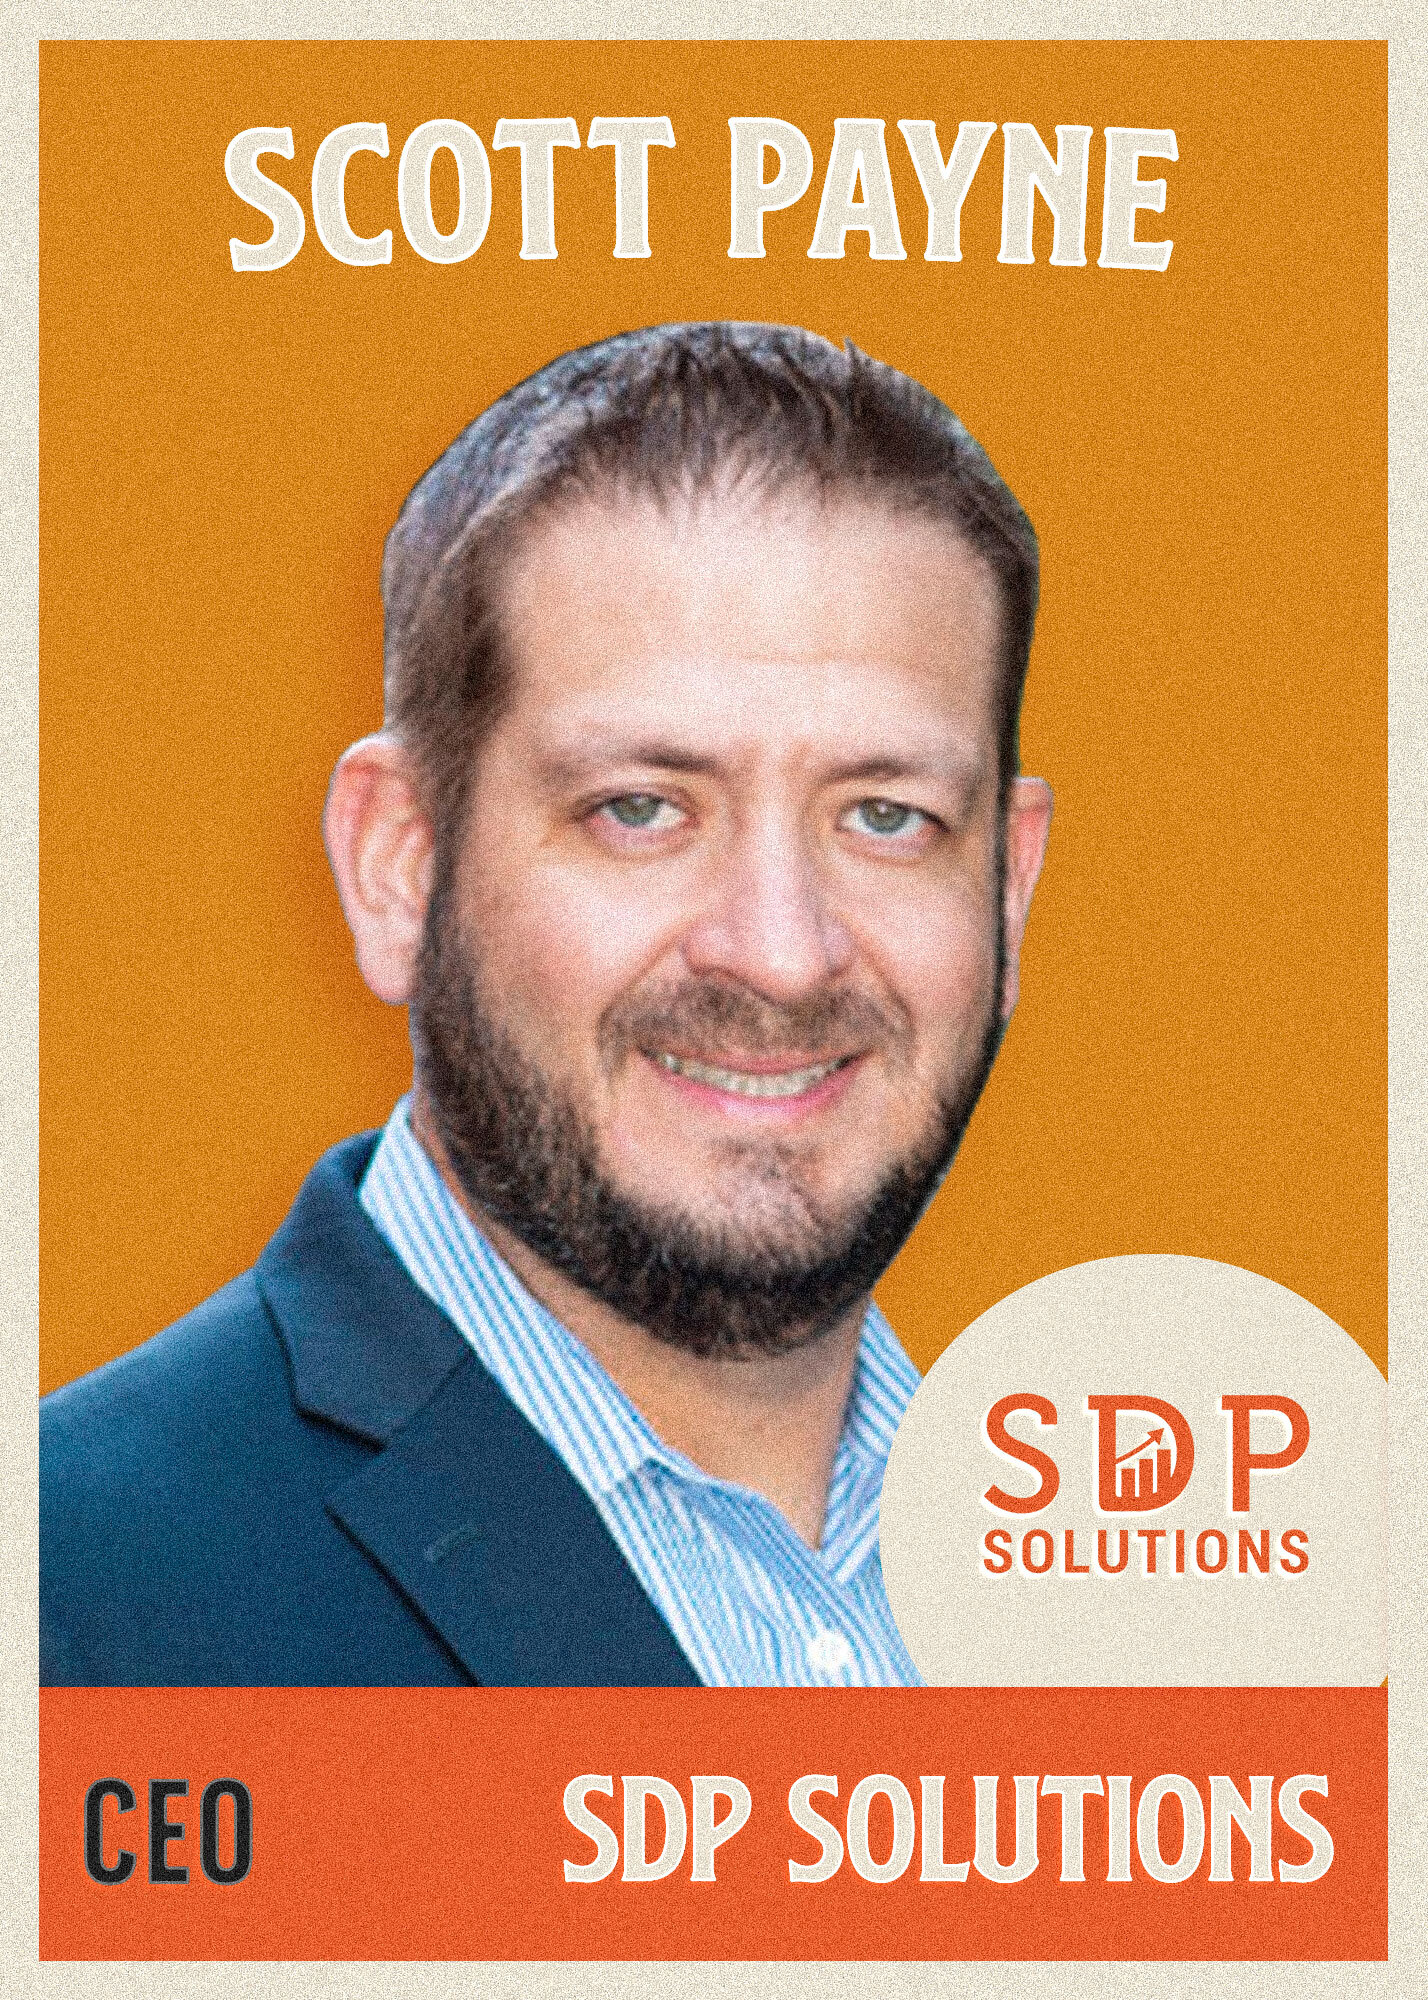 Scott Payne — CEO at SDP Solutions